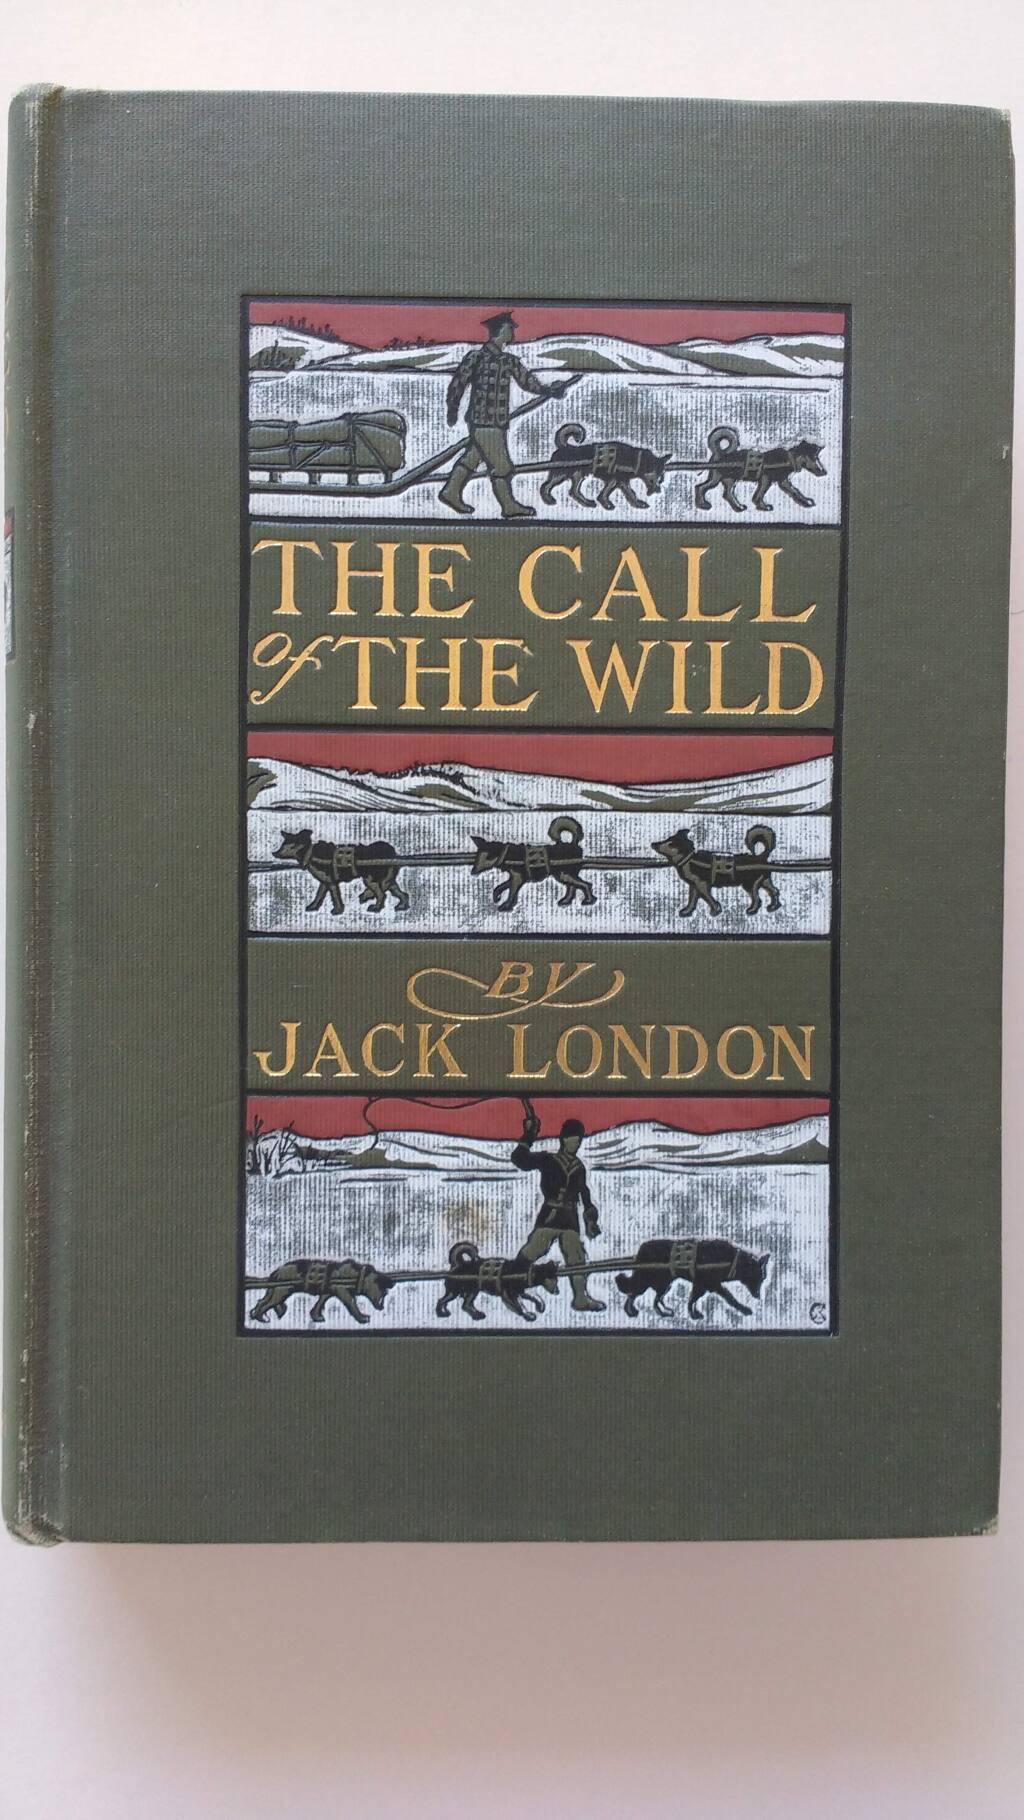 'The Call of the Wild,' by Jack London. Published in 1903.